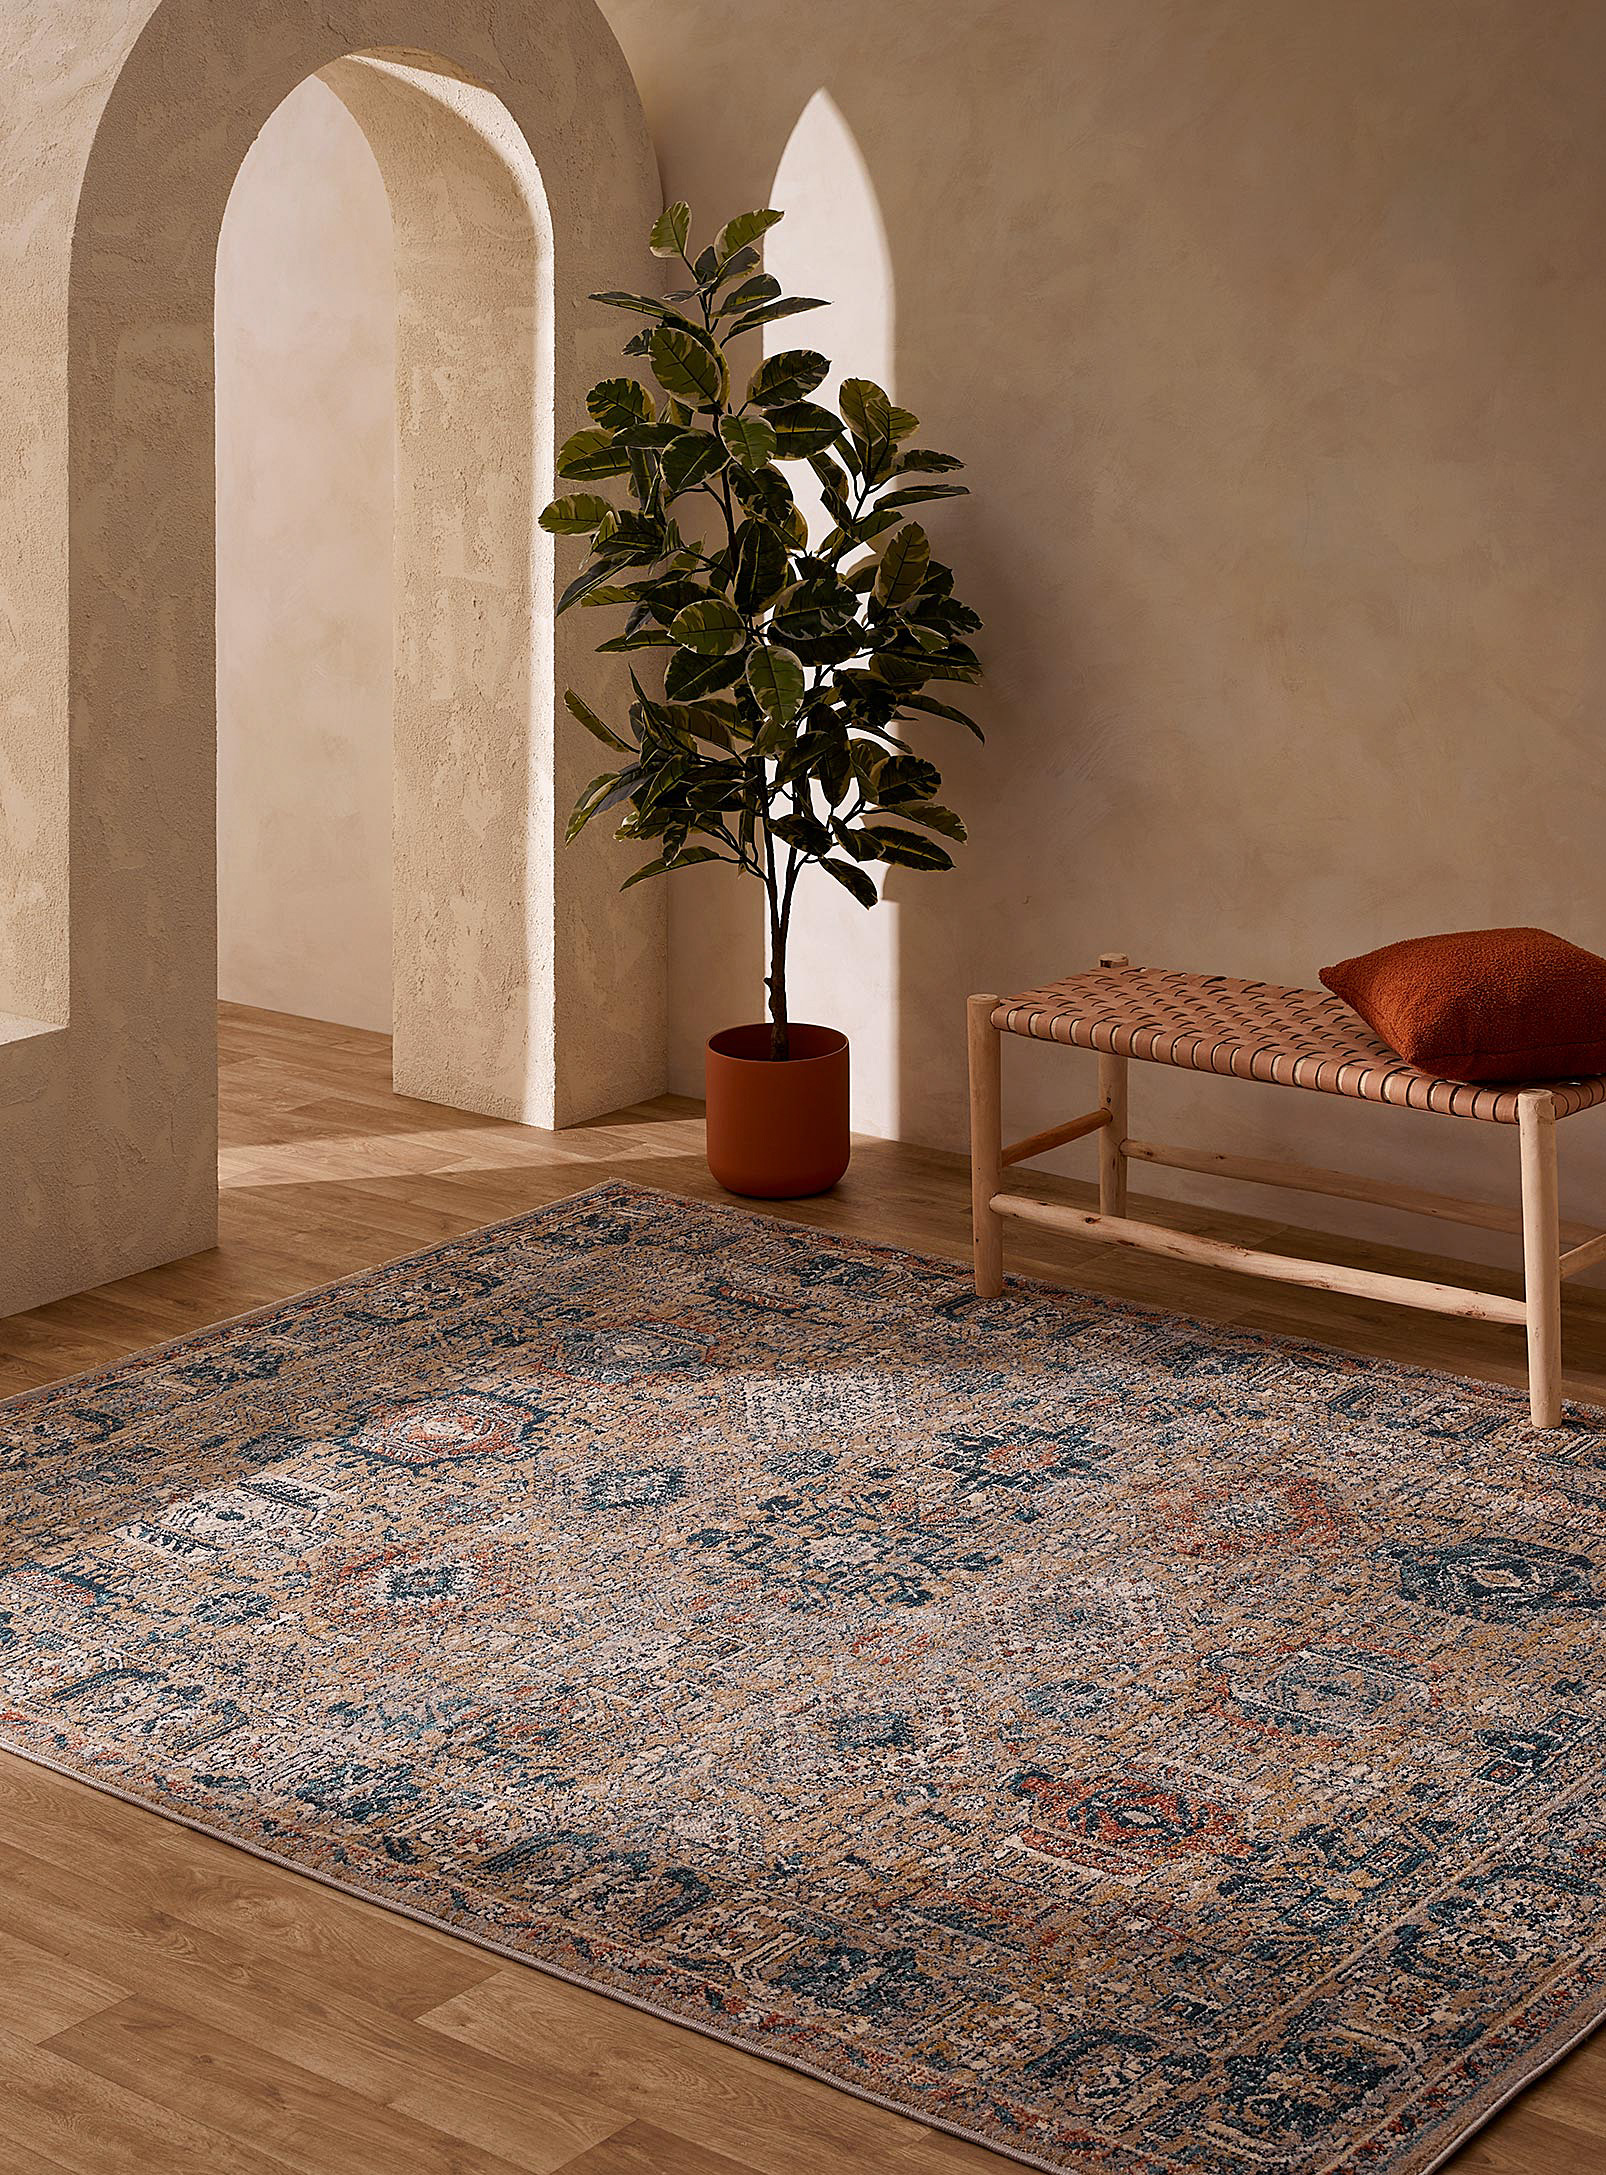 Simons Maison Lost City Rug See Available Sizes In Patterned Grey